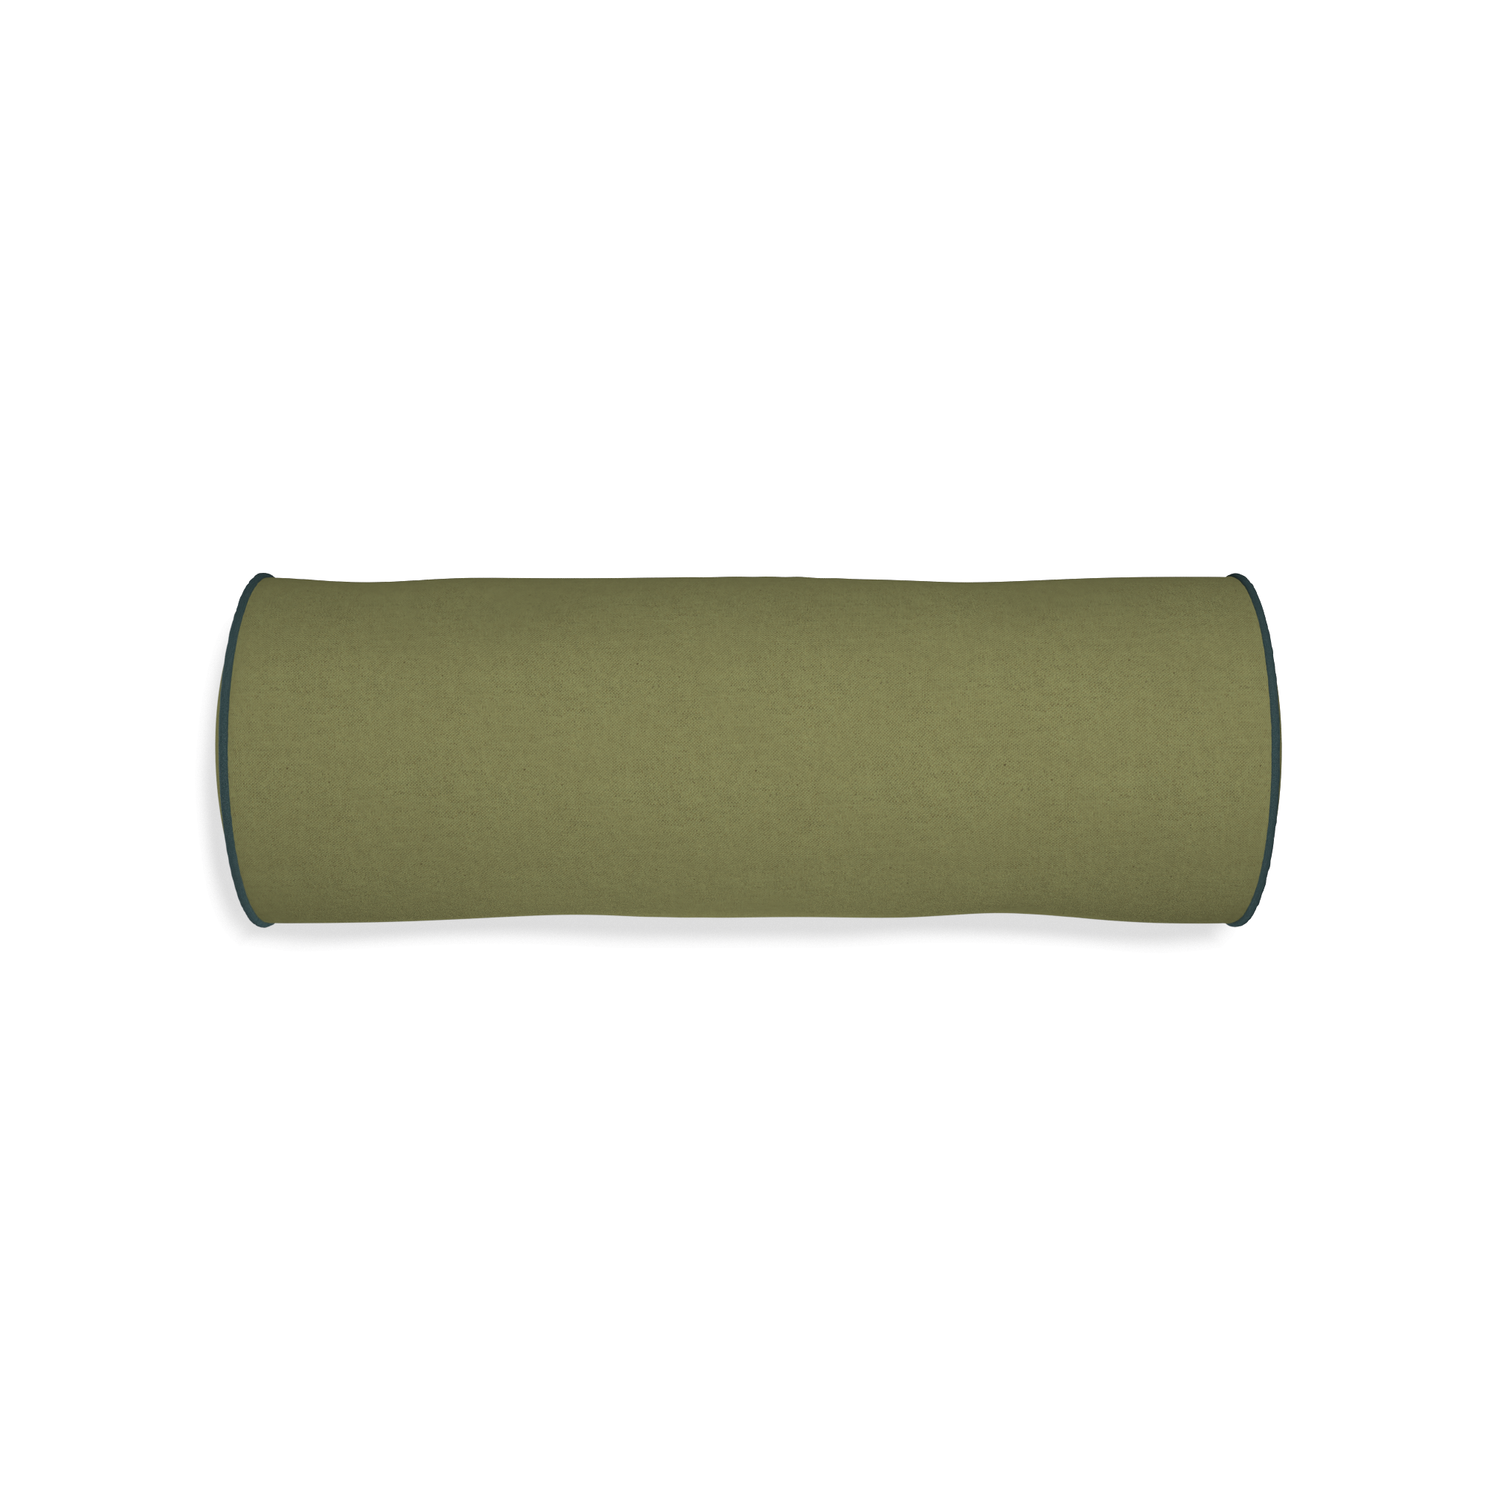 Bolster moss custom moss greenpillow with p piping on white background